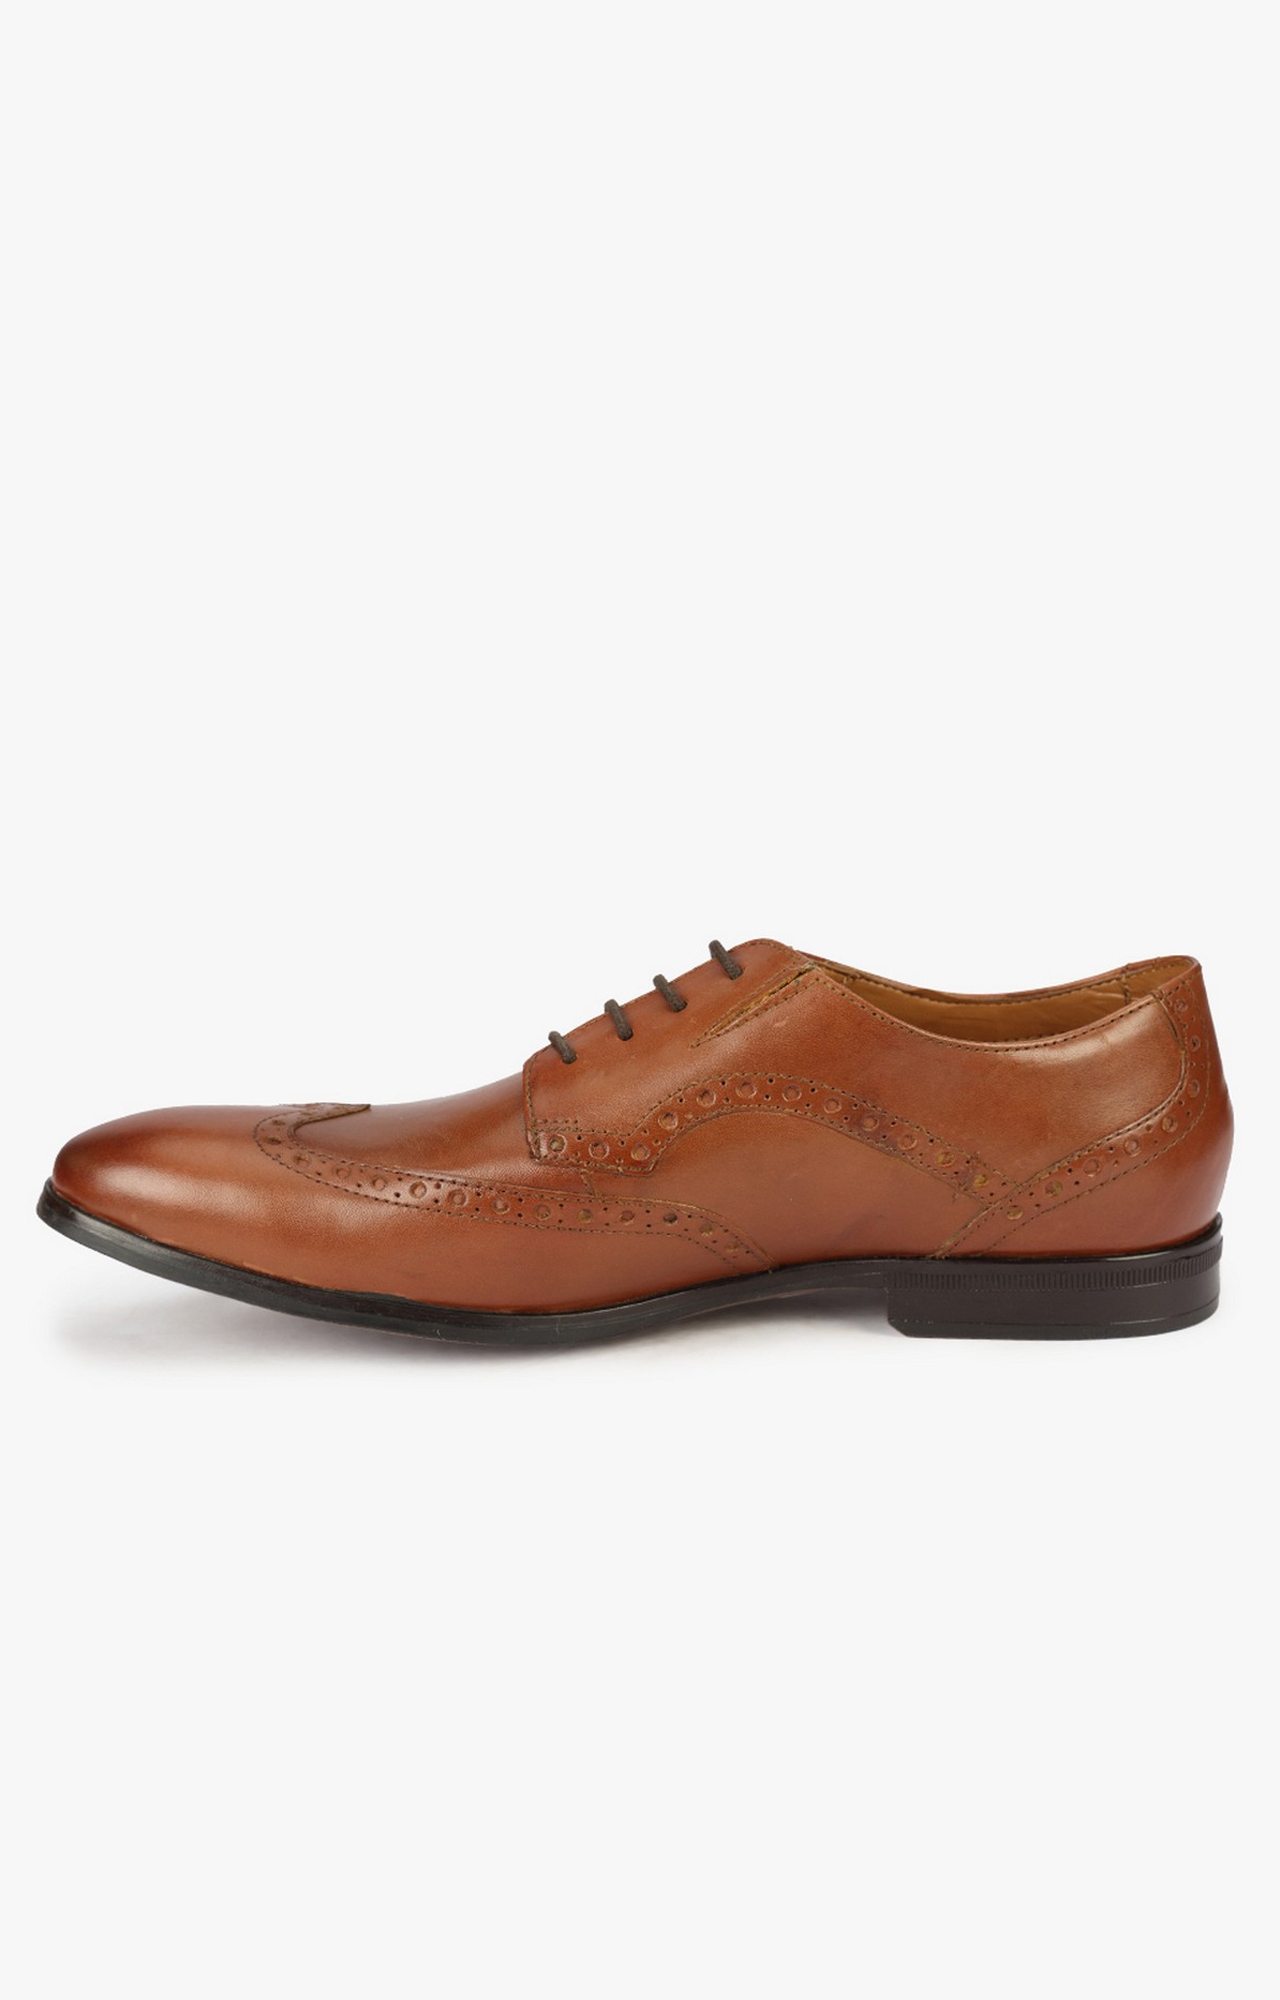 Ruosh | Tan Derby Shoes 2